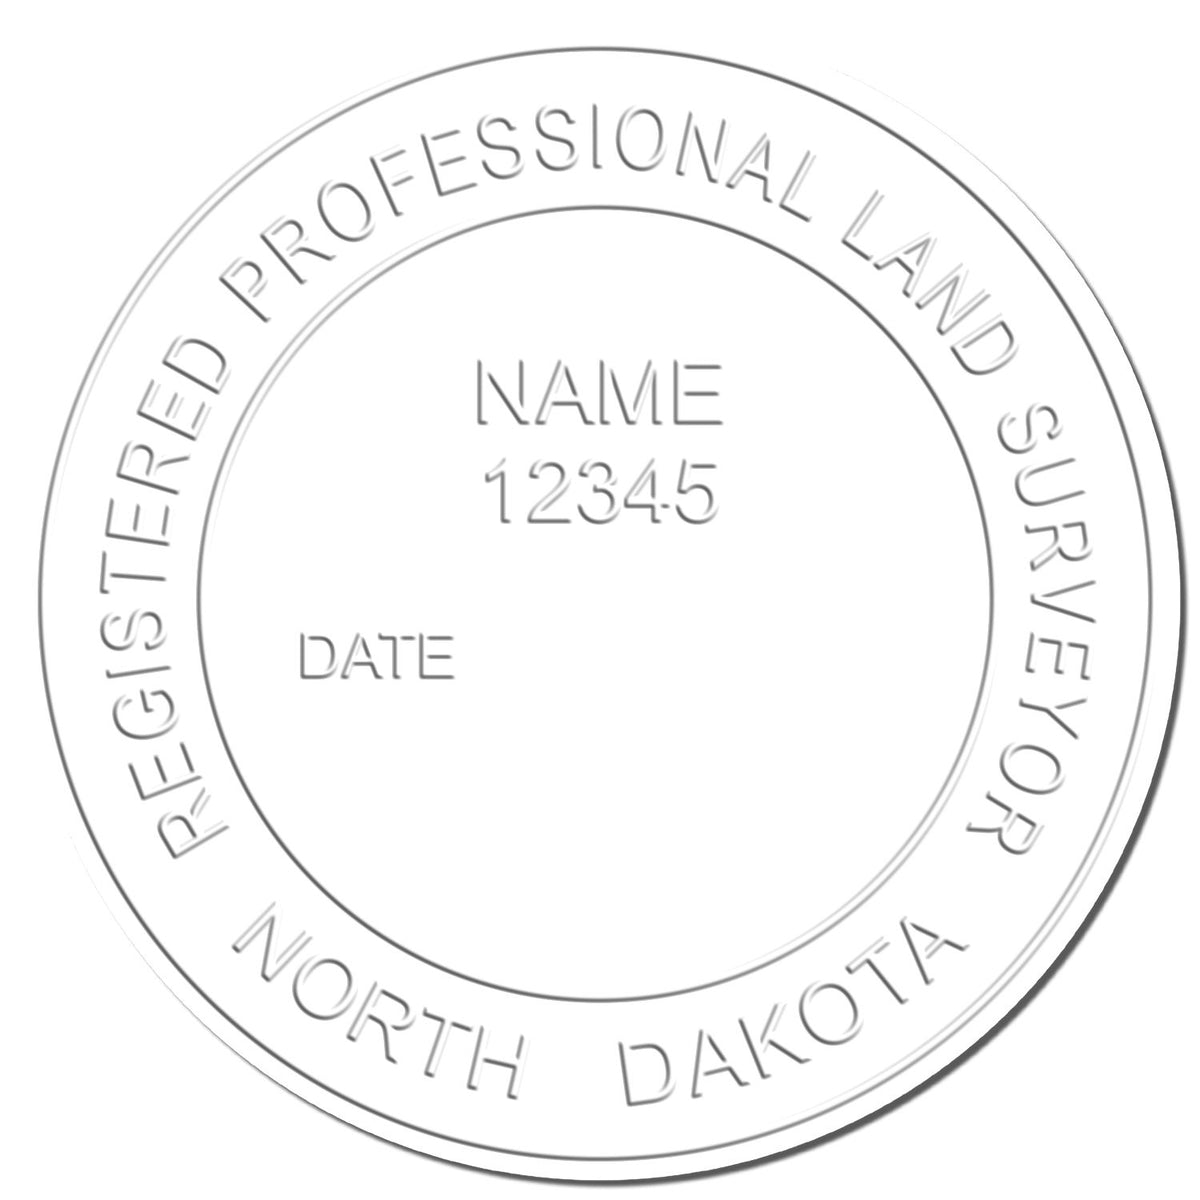 This paper is stamped with a sample imprint of the State of North Dakota Soft Land Surveyor Embossing Seal, signifying its quality and reliability.